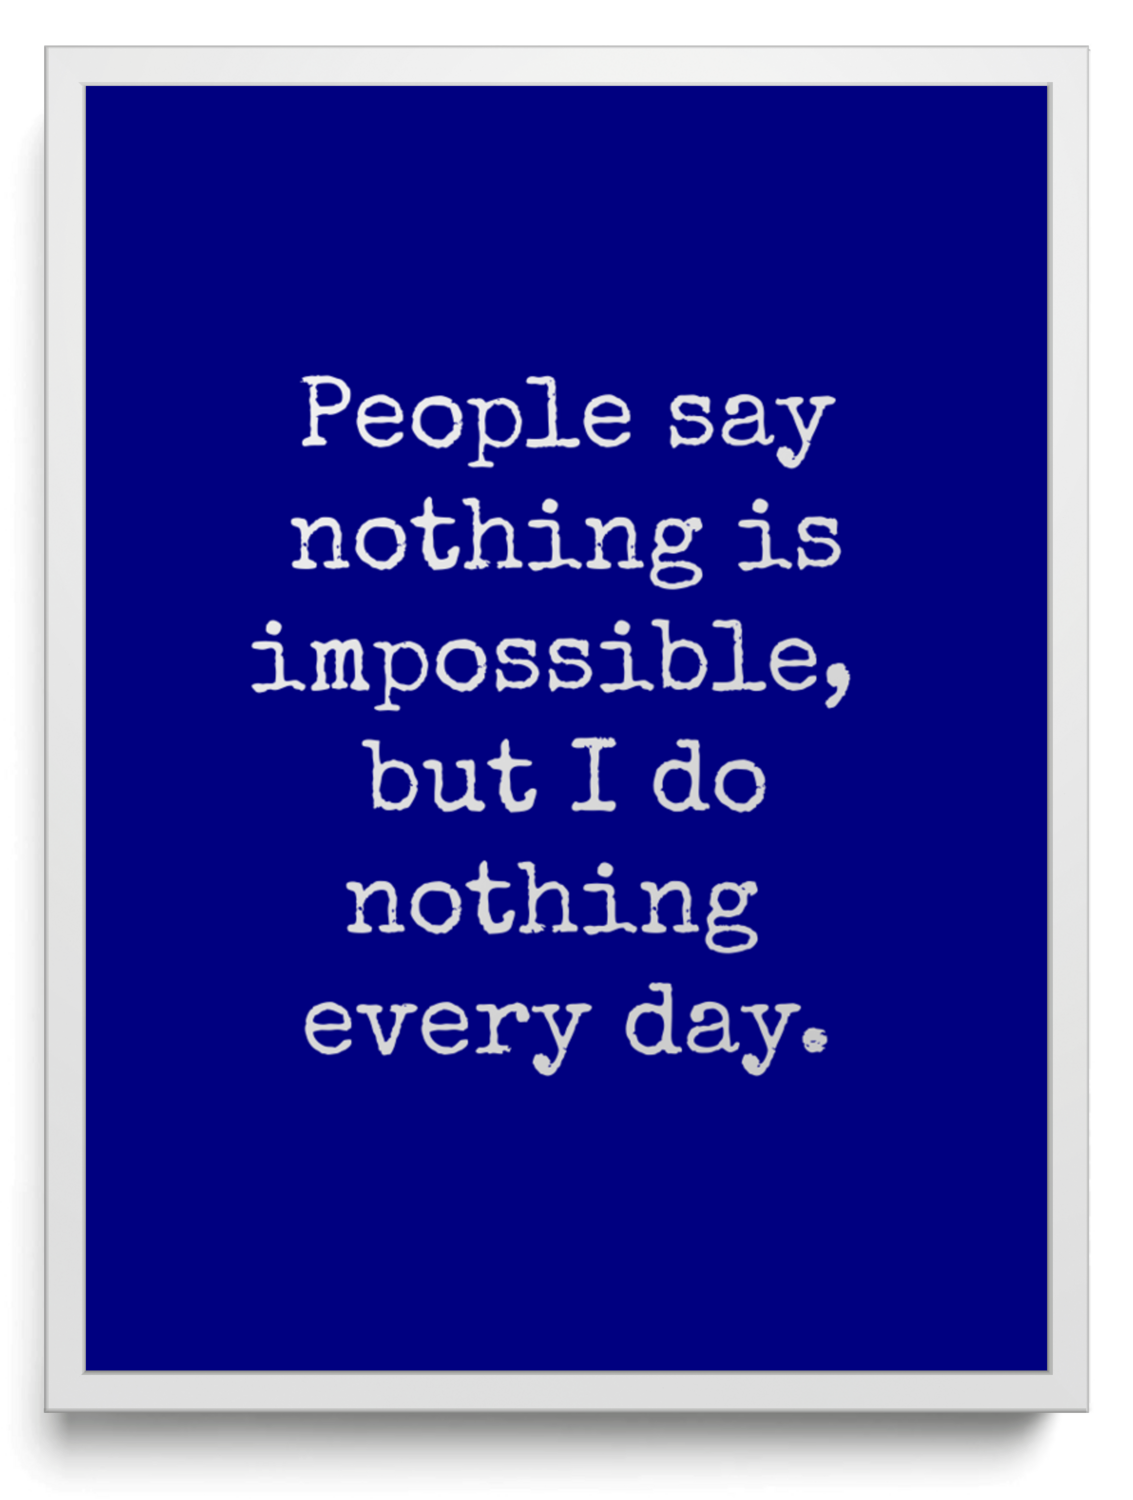 People say nothing is impossible, but I do nothing every day. framed typographic print